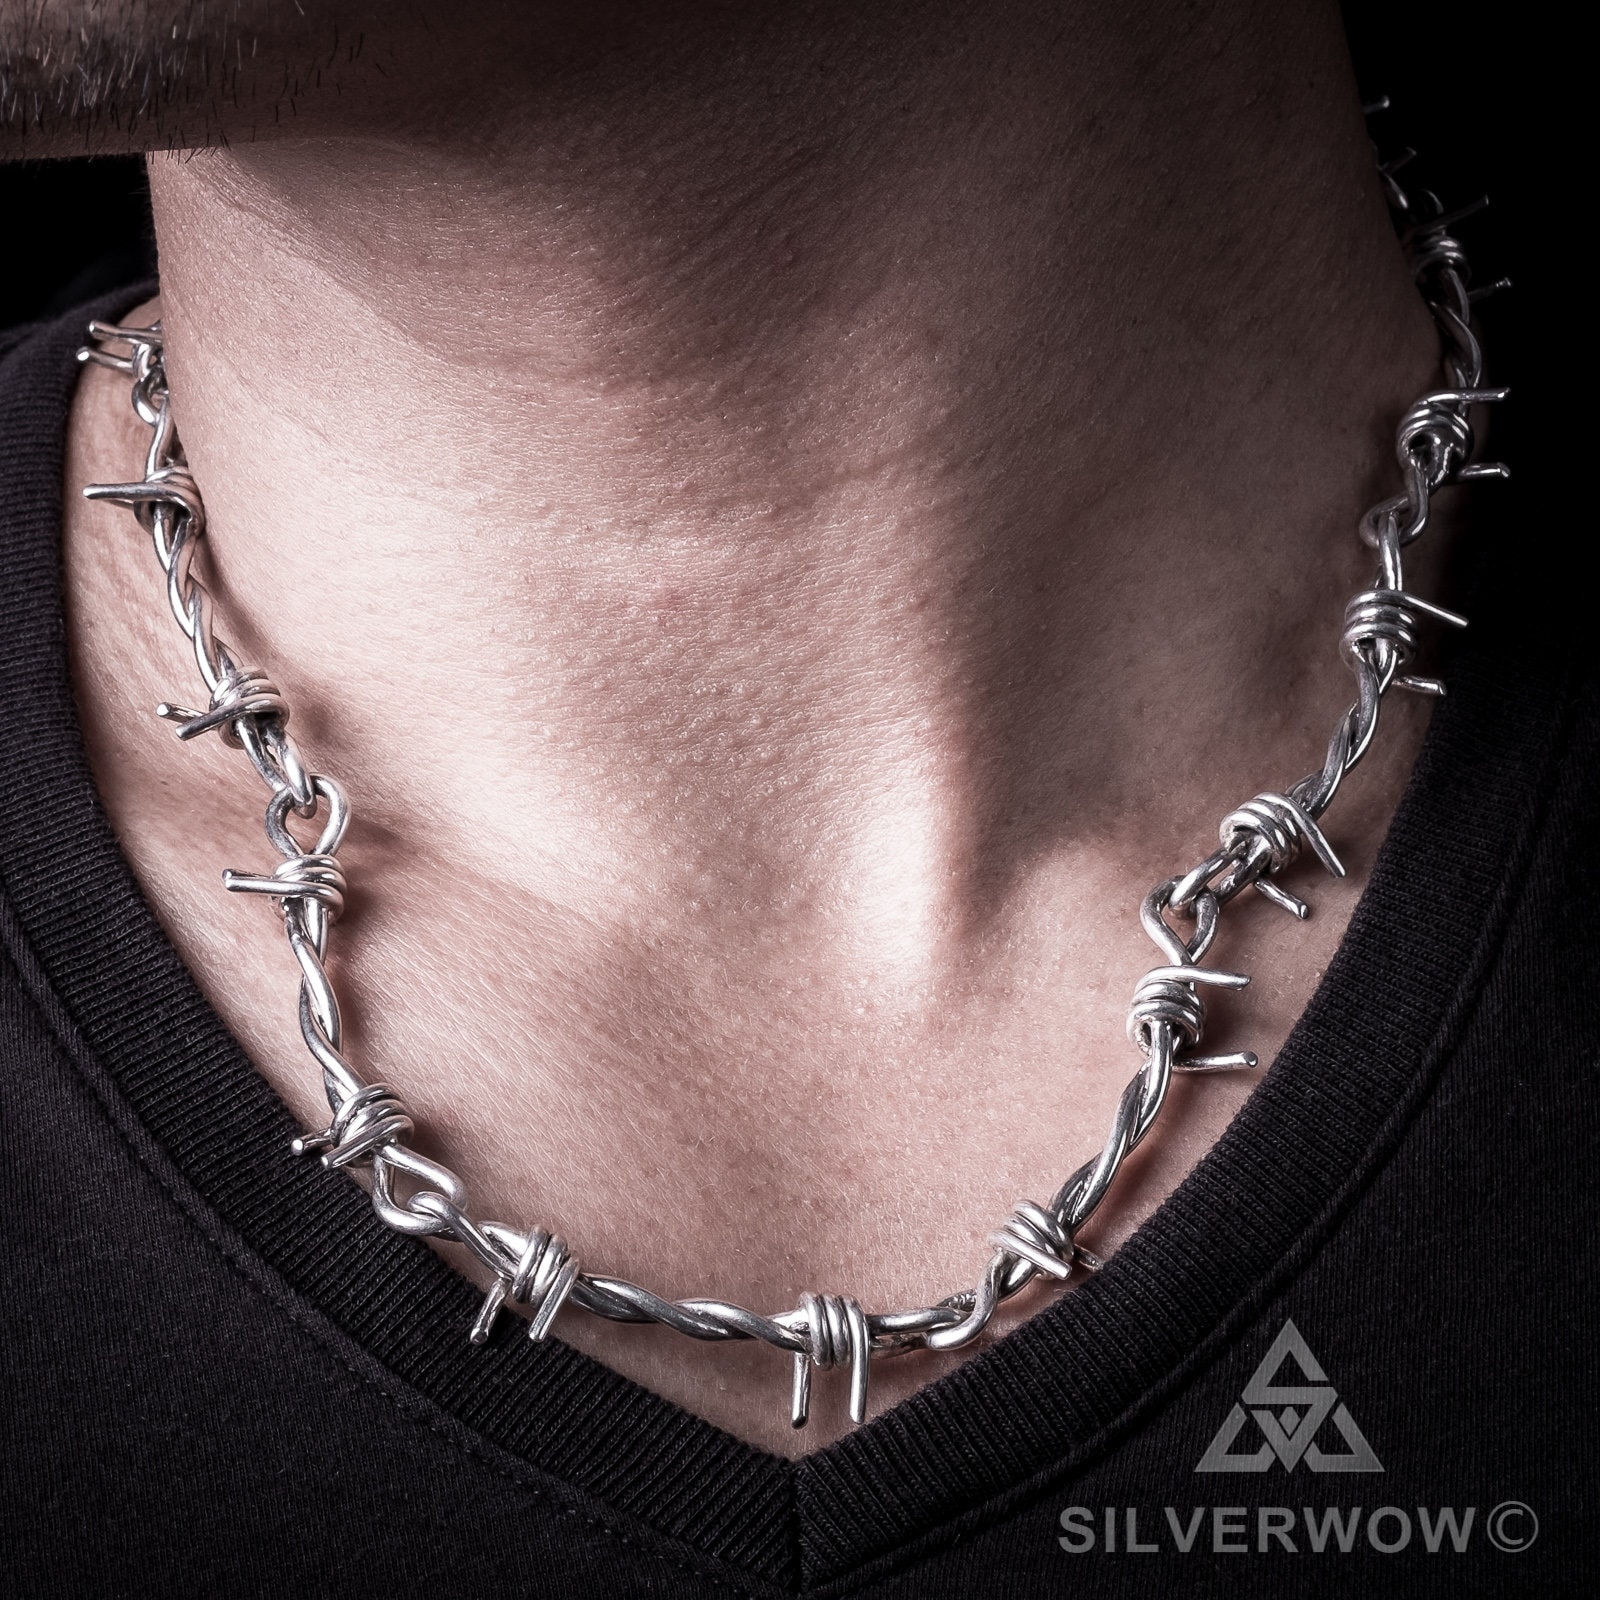 Barbed Wire Choker Necklace Handmade Silver Black Fashion NEW Collar Women